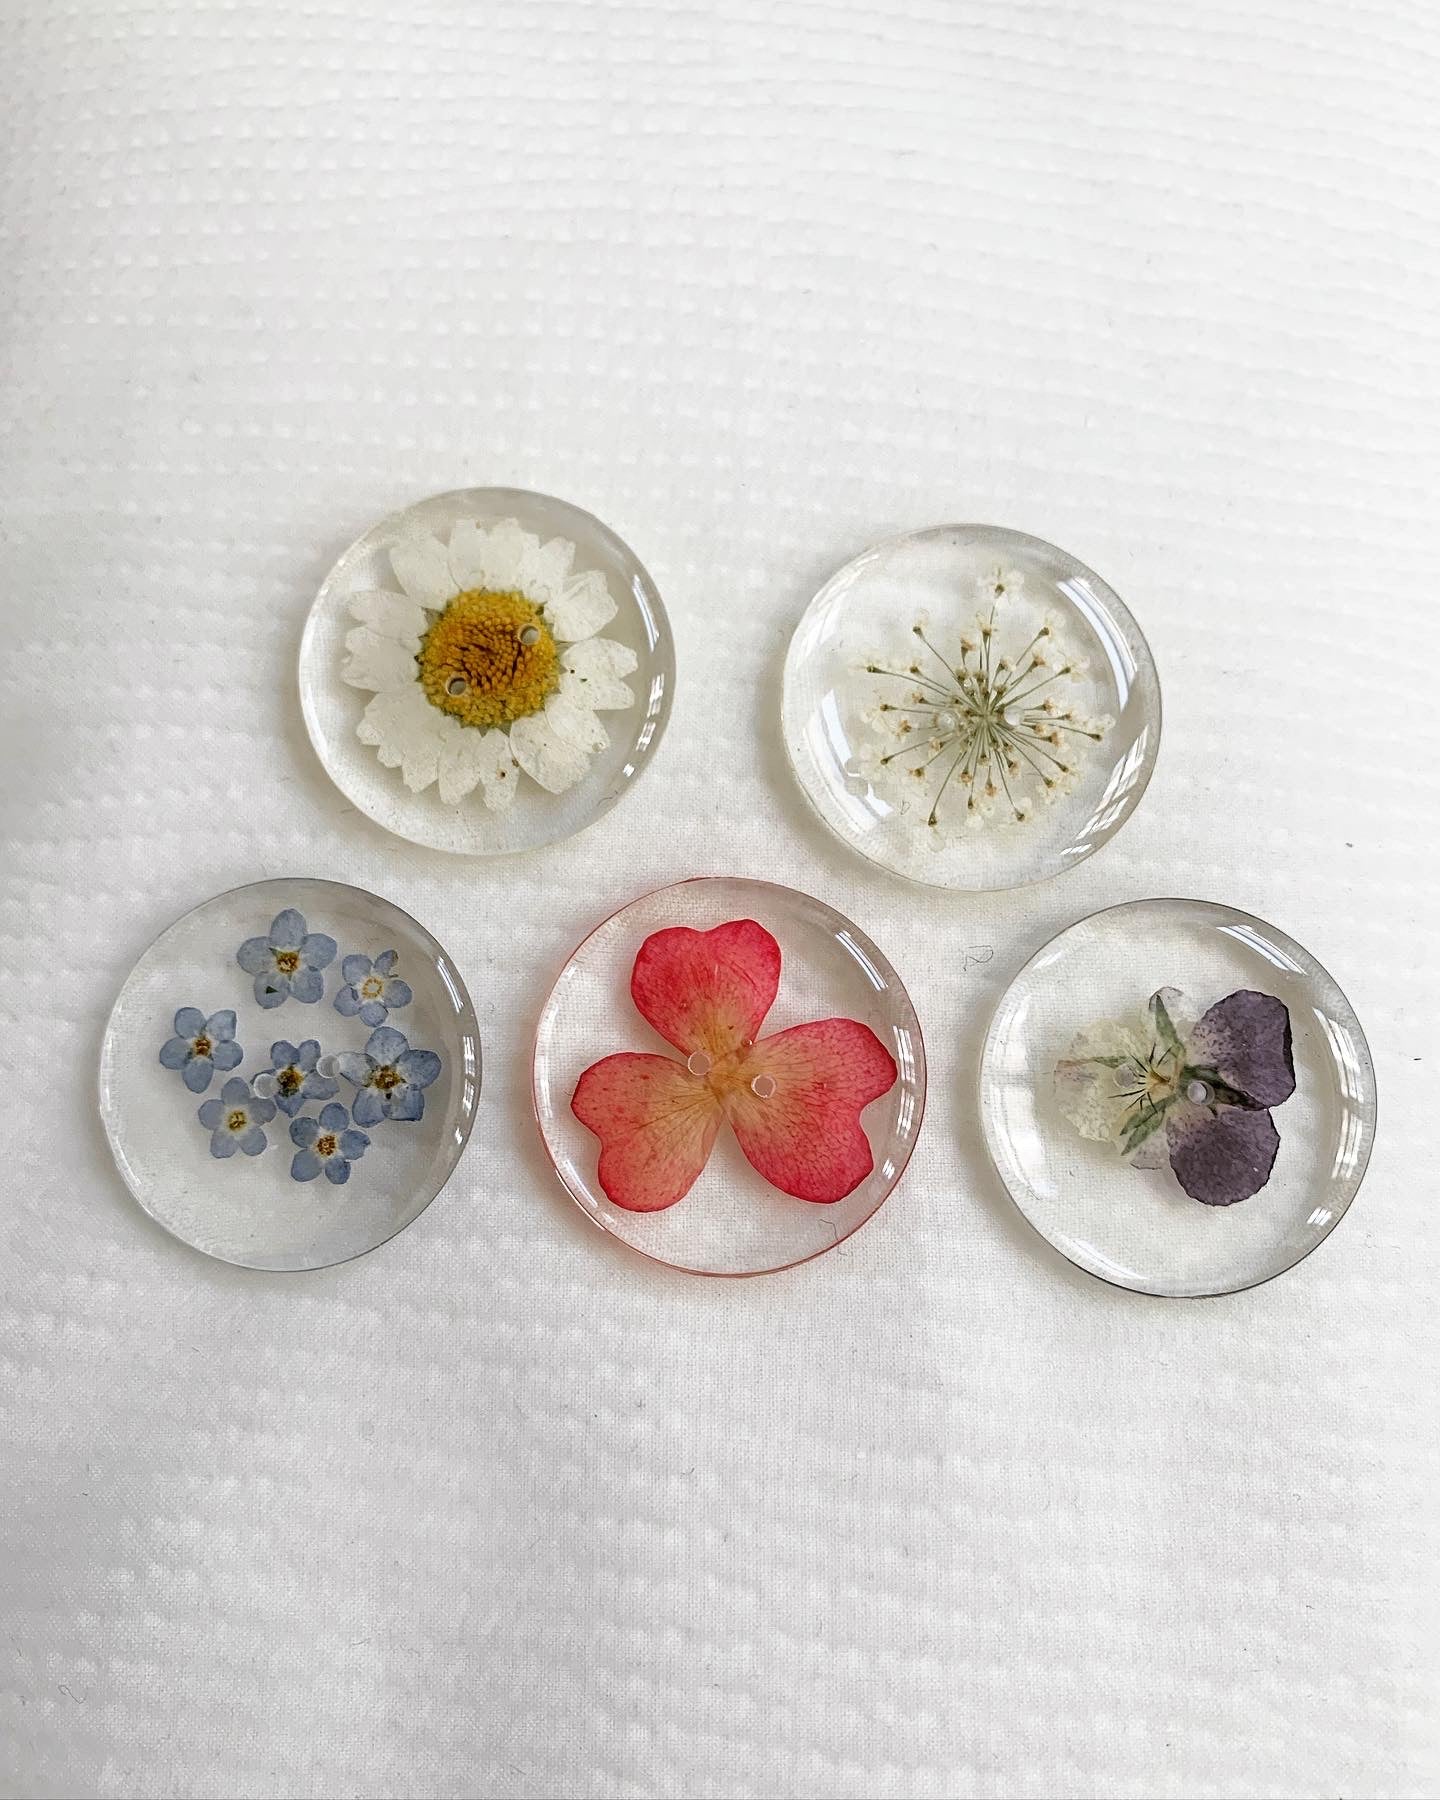 Assorted botanical plants preserved in round buttons (1 daisy, 1 pansy, 1 tea rose petal, 1 Queen Anne's lace, 1 forget-me-not)